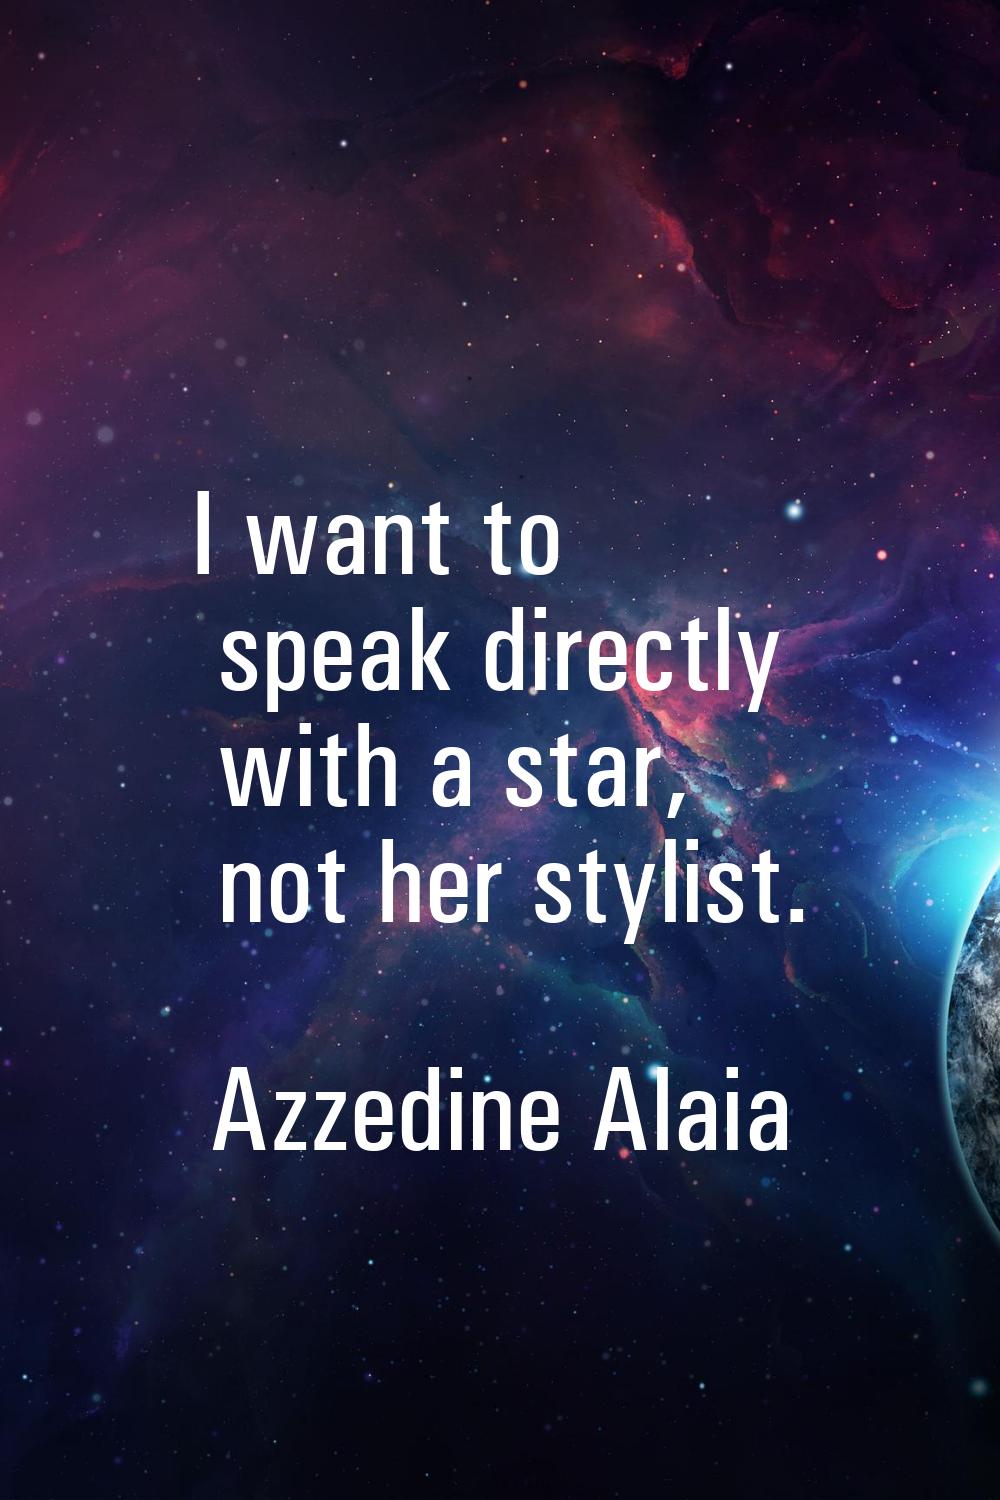 I want to speak directly with a star, not her stylist.